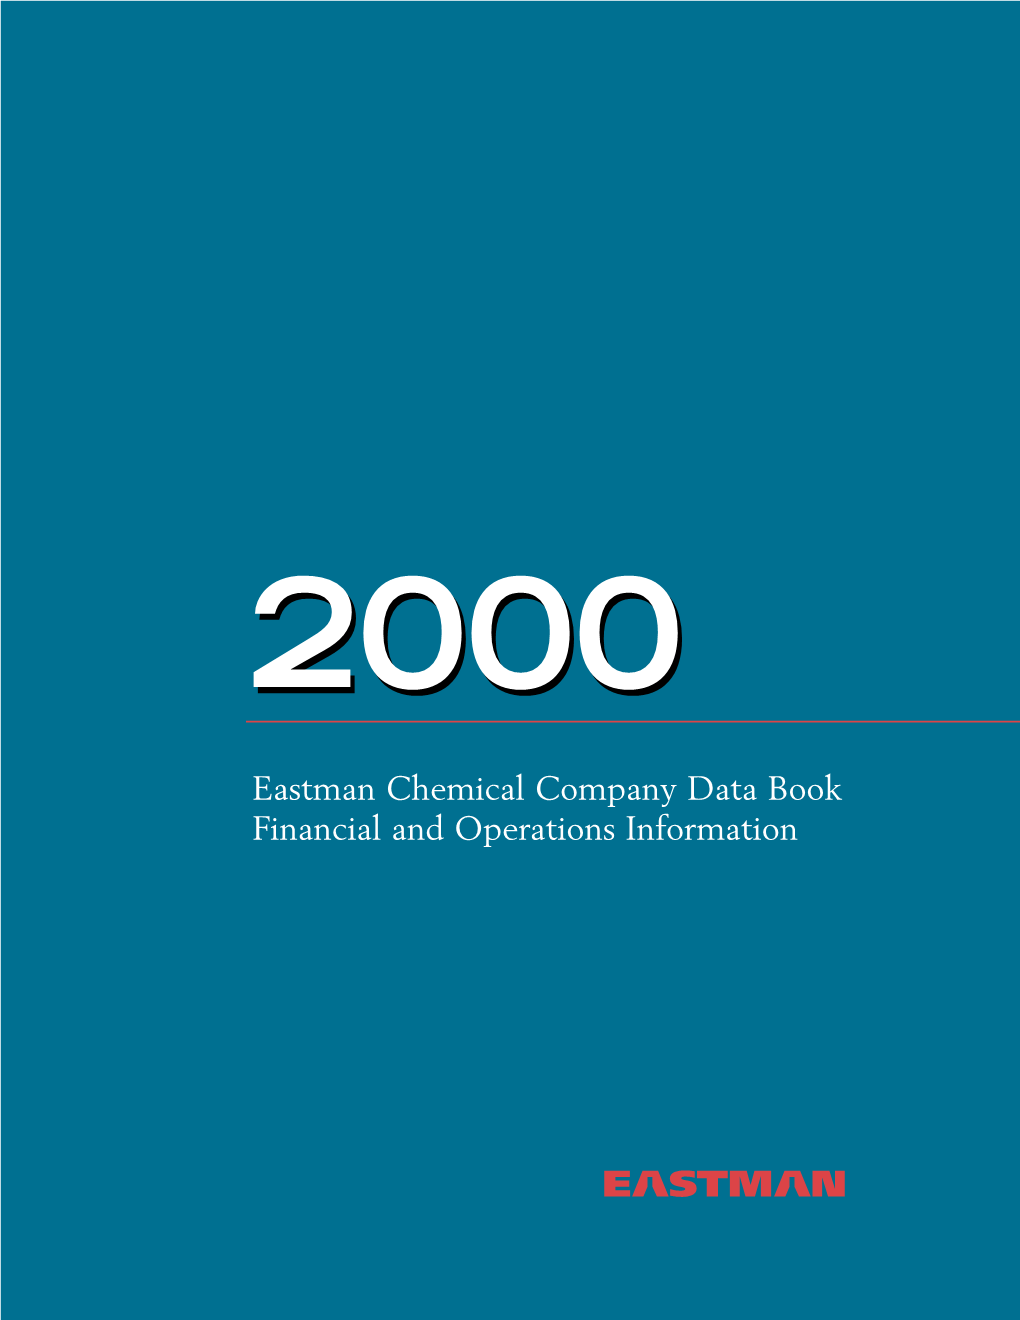 Eastman Chemical Company Data Book Financial and Operations Information Contents